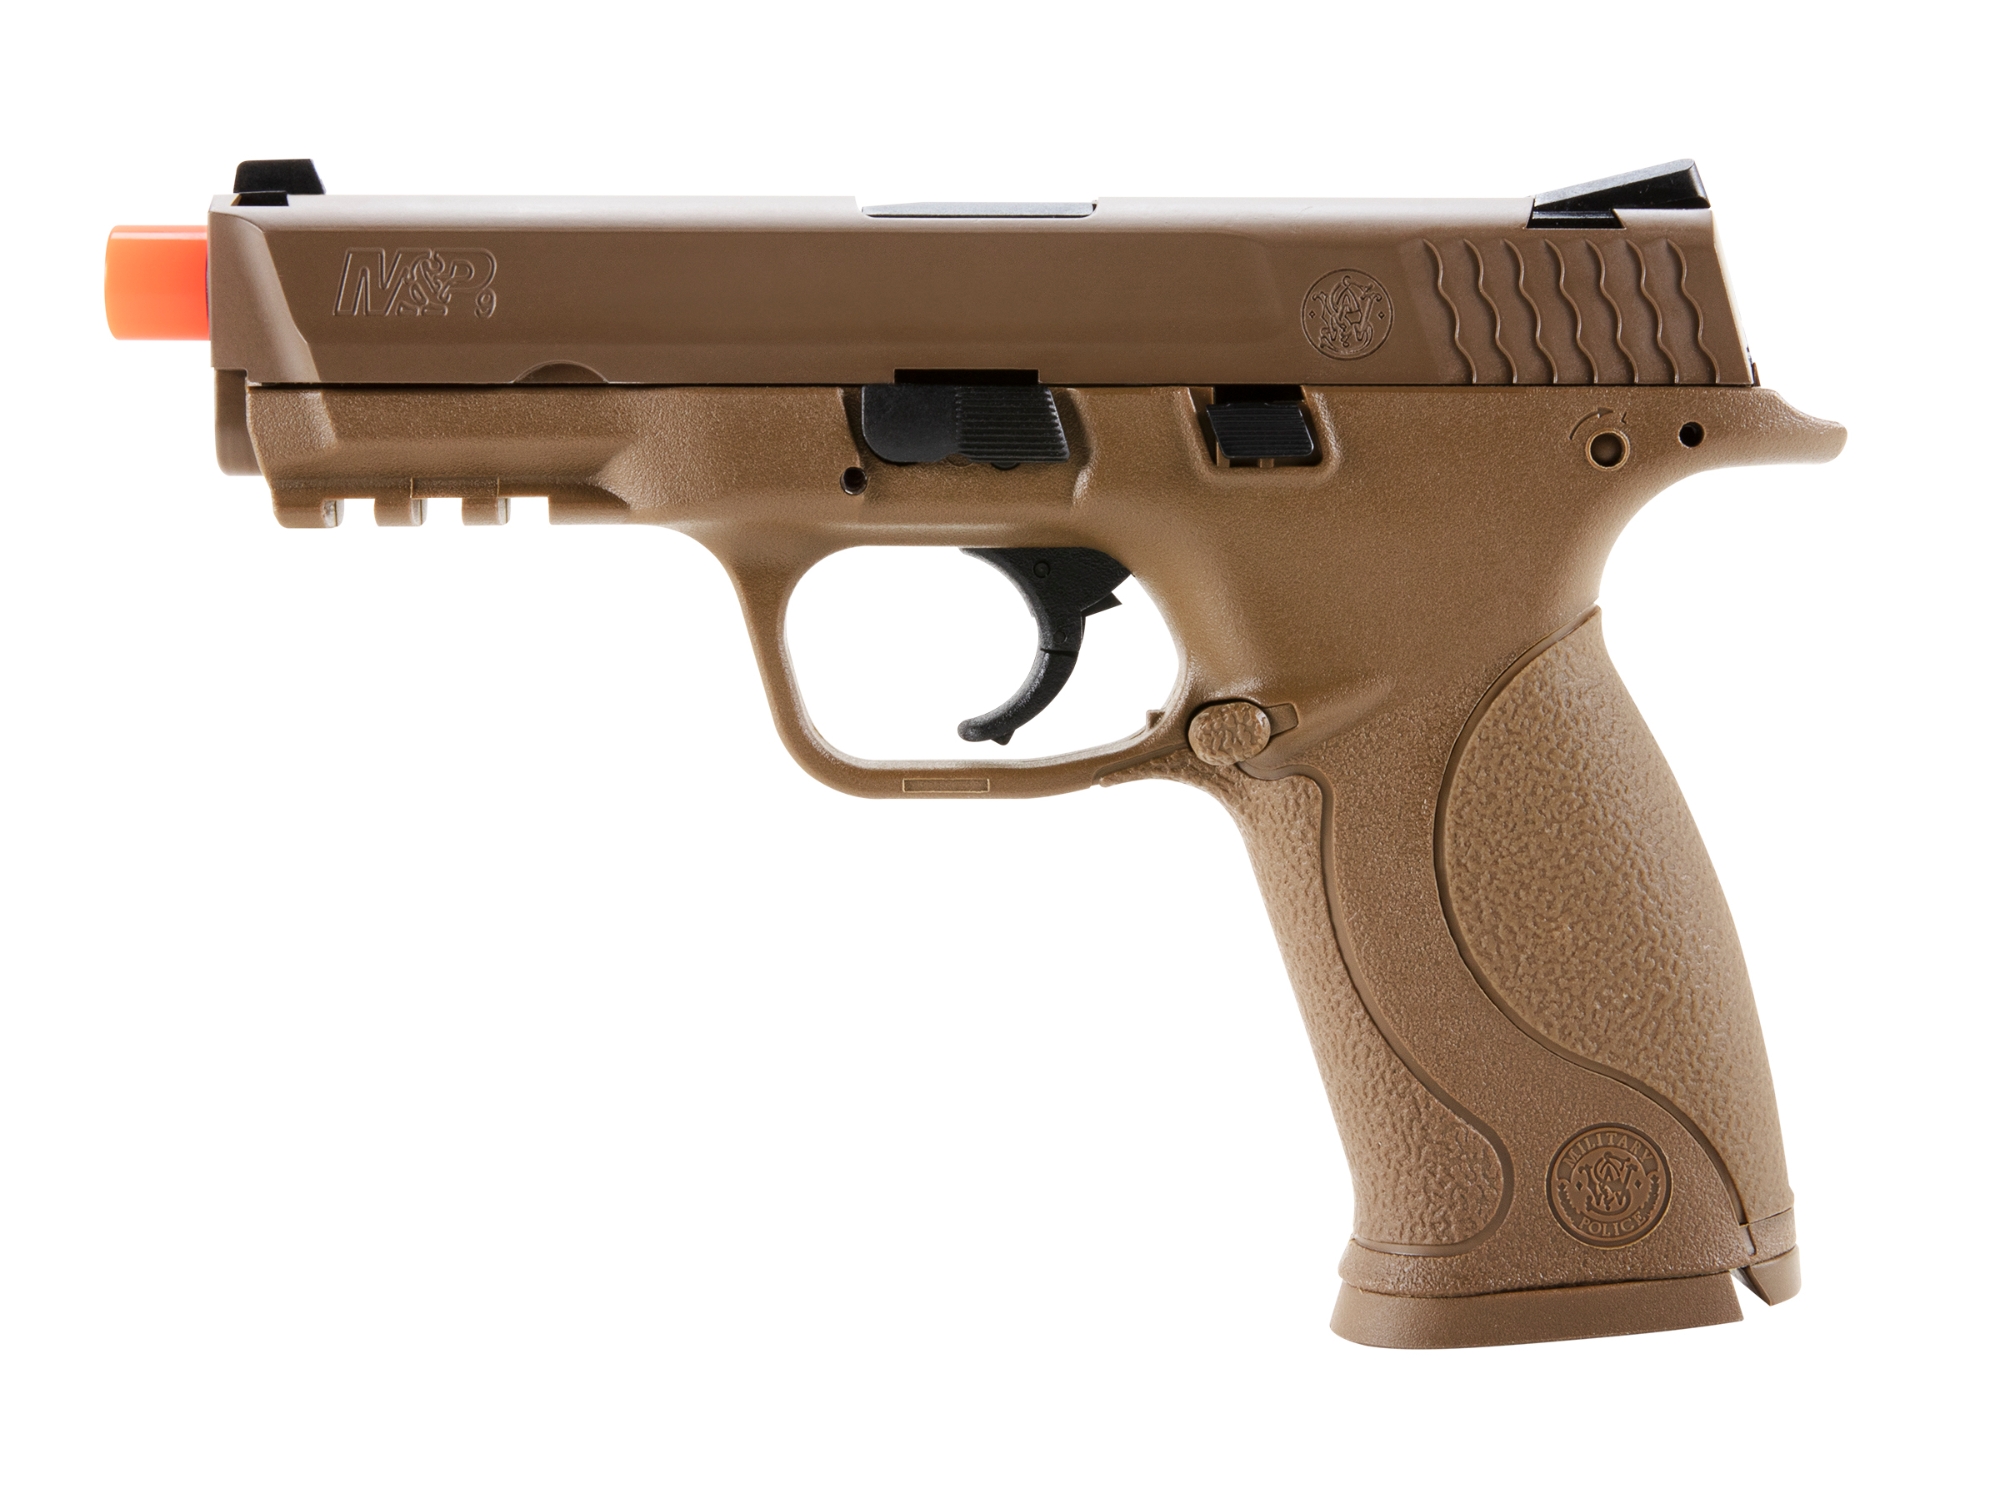 Smith & Wesson M&P 9 GBB Airsoft Pistol 6mm